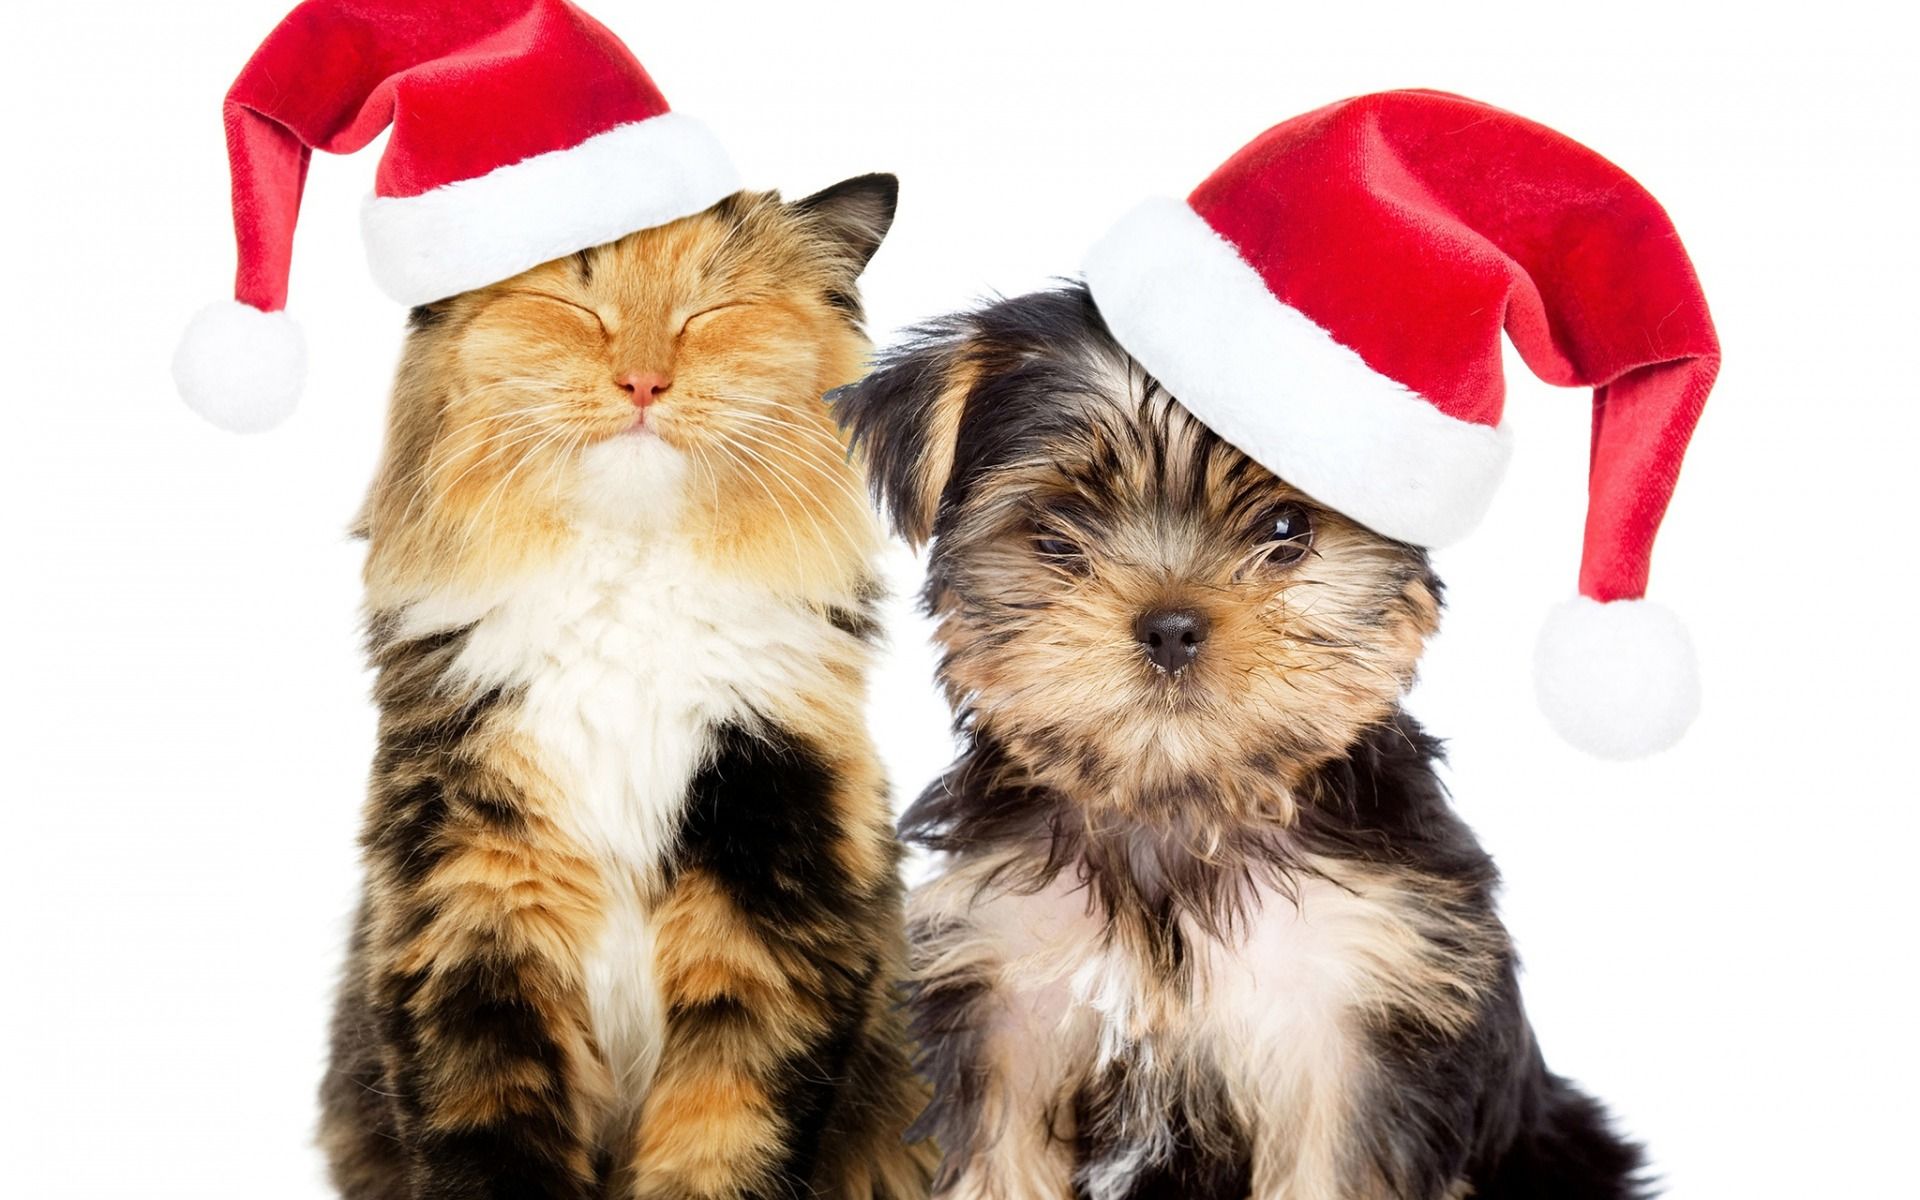 Download wallpaper Christmas, dog and cat, Yorkshire terrier, cute animals, New Year, Christmas hats, friendship concepts for desktop with resolution 1920x1200. High Quality HD picture wallpaper